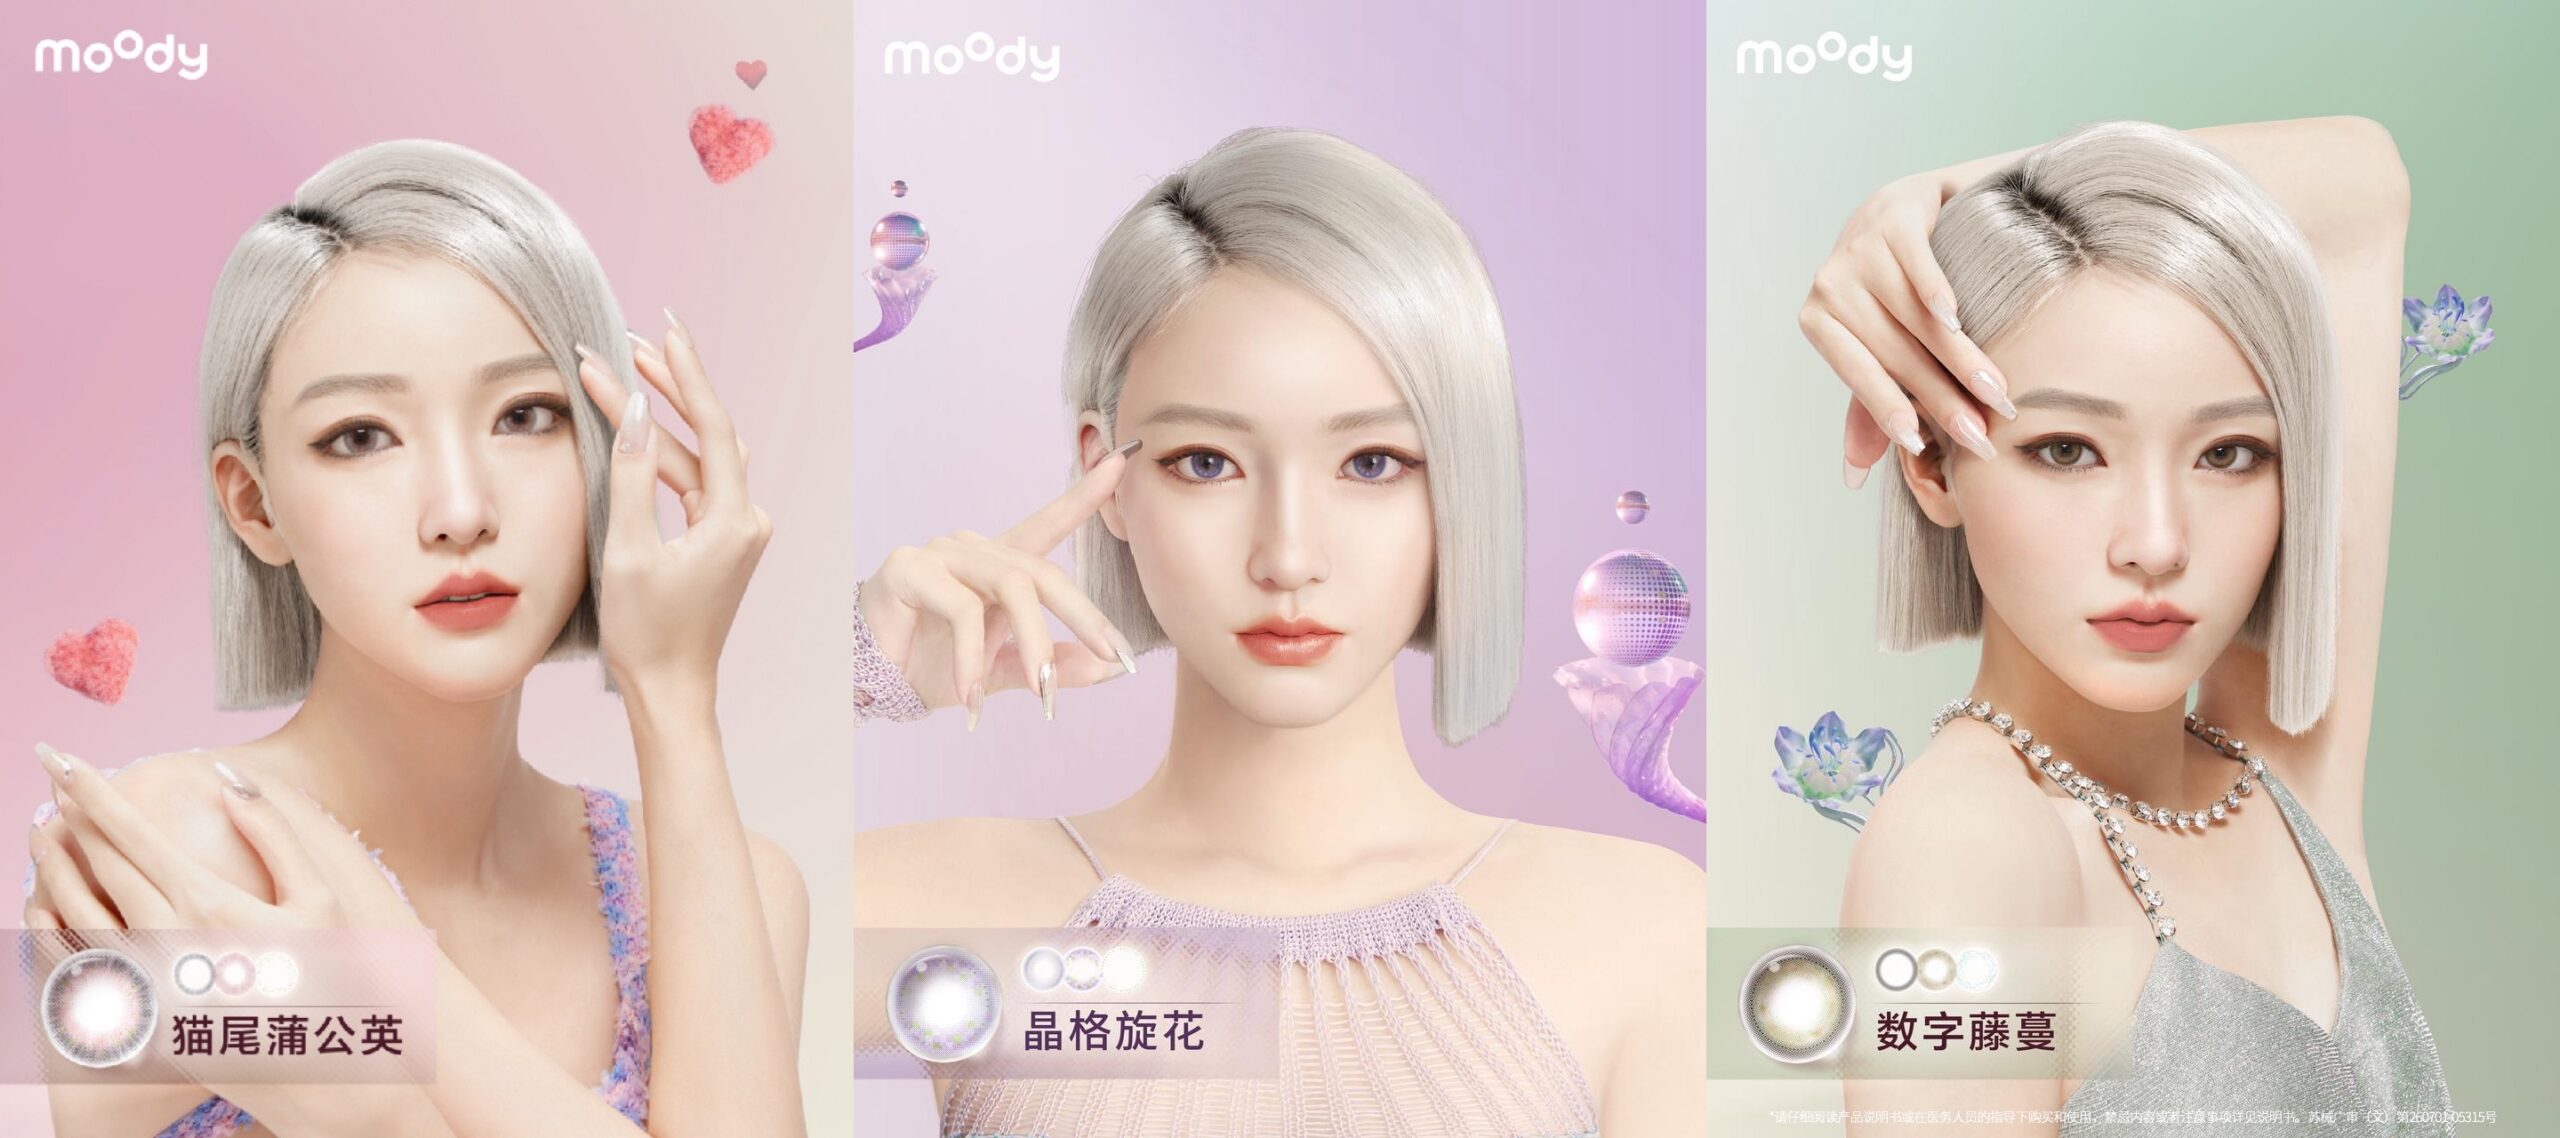 Ayayi takes the lead of Moody's colour contact lens campaign